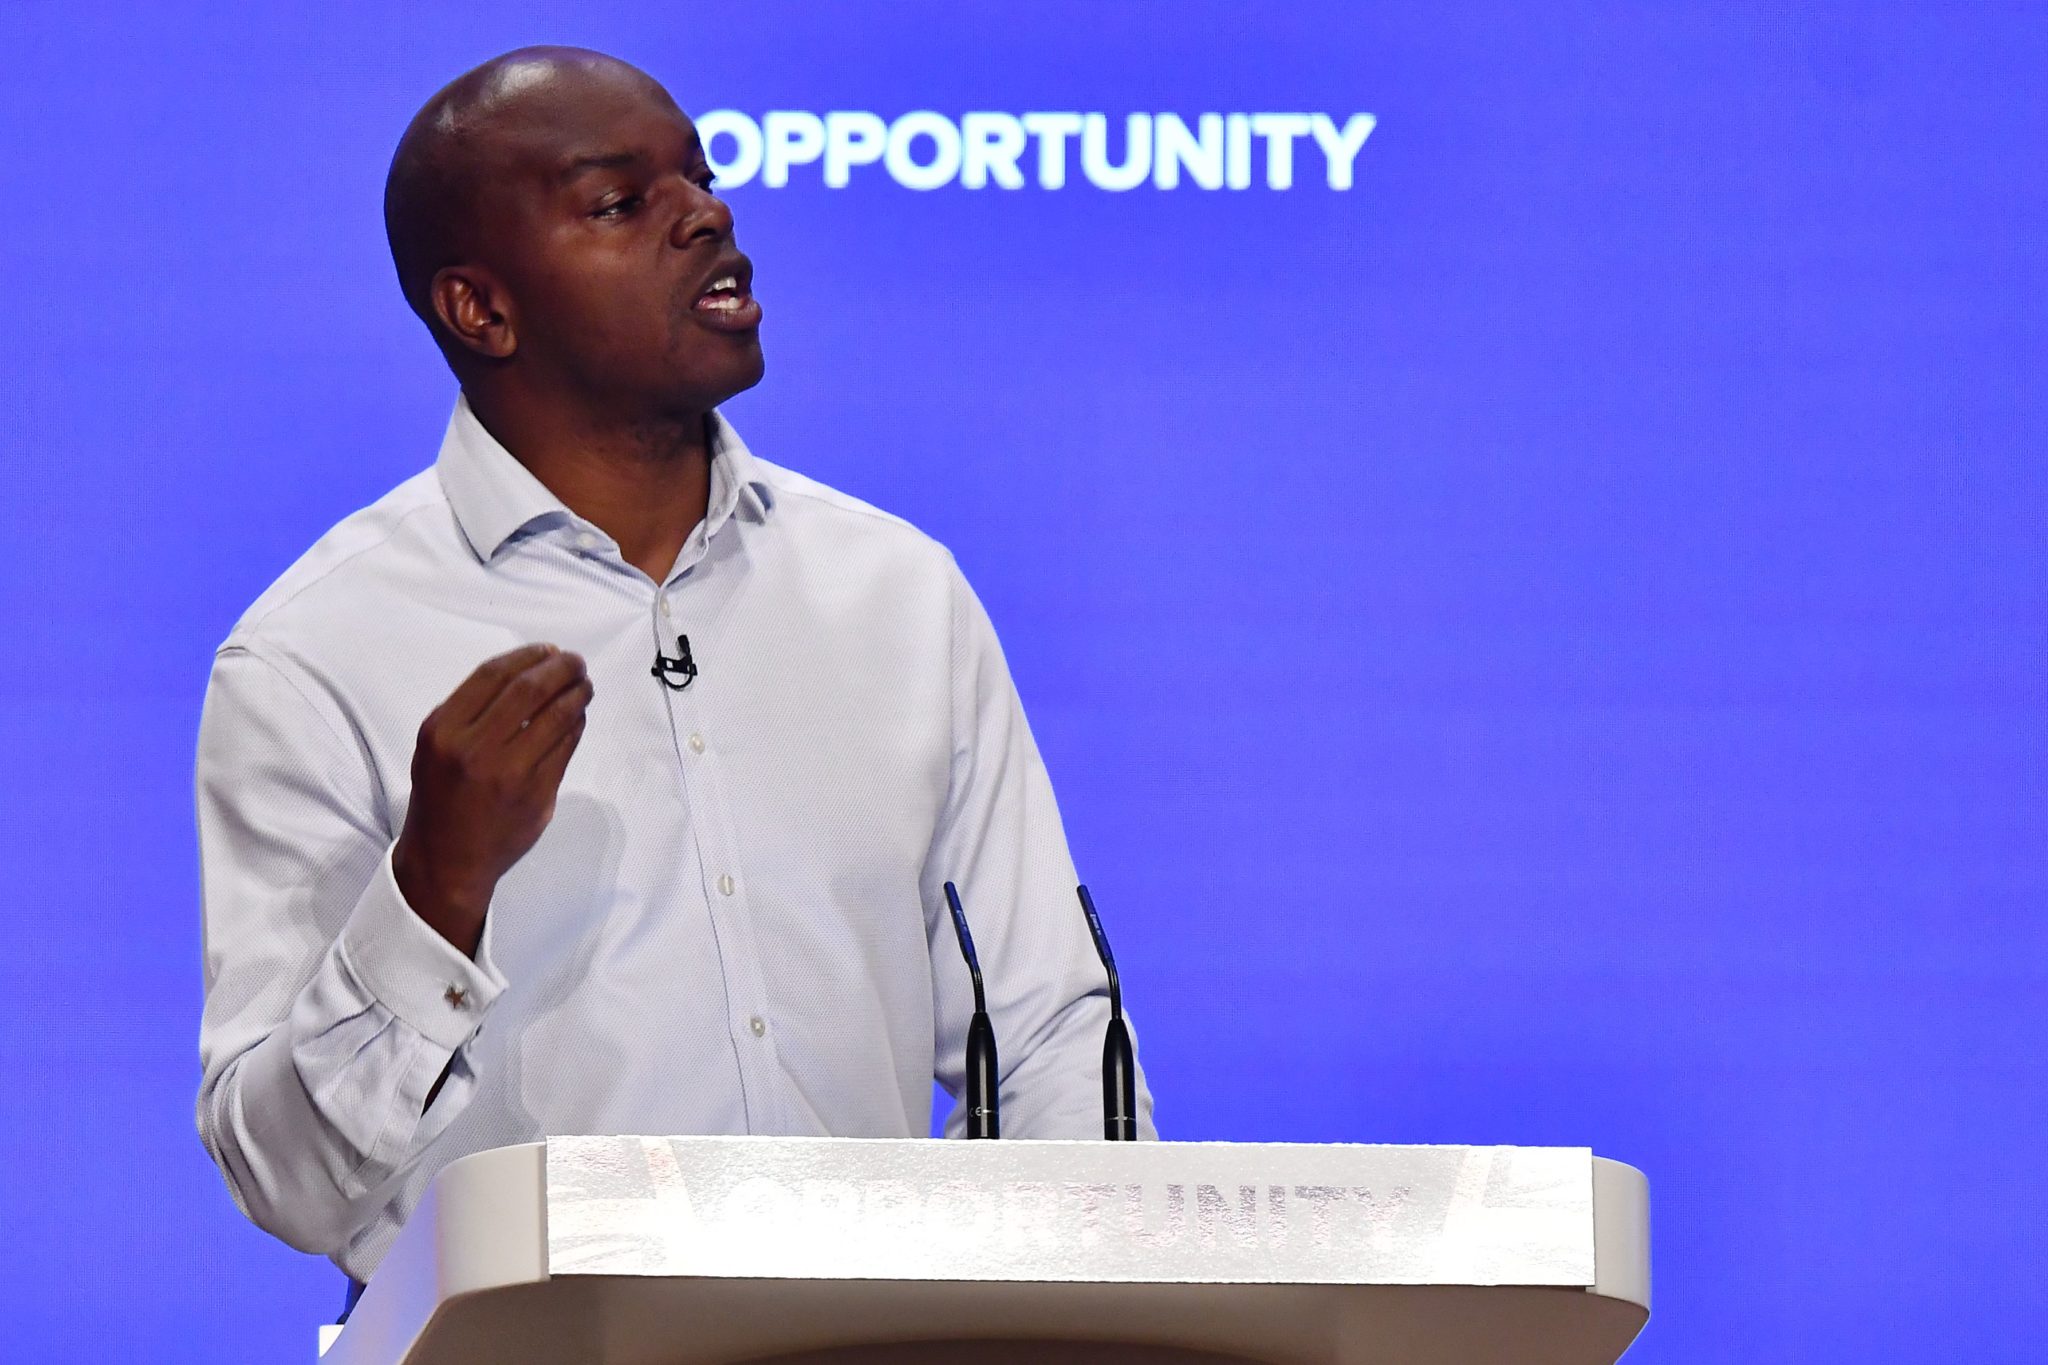 Shaun Bailey, Conservative candidate for London mayor